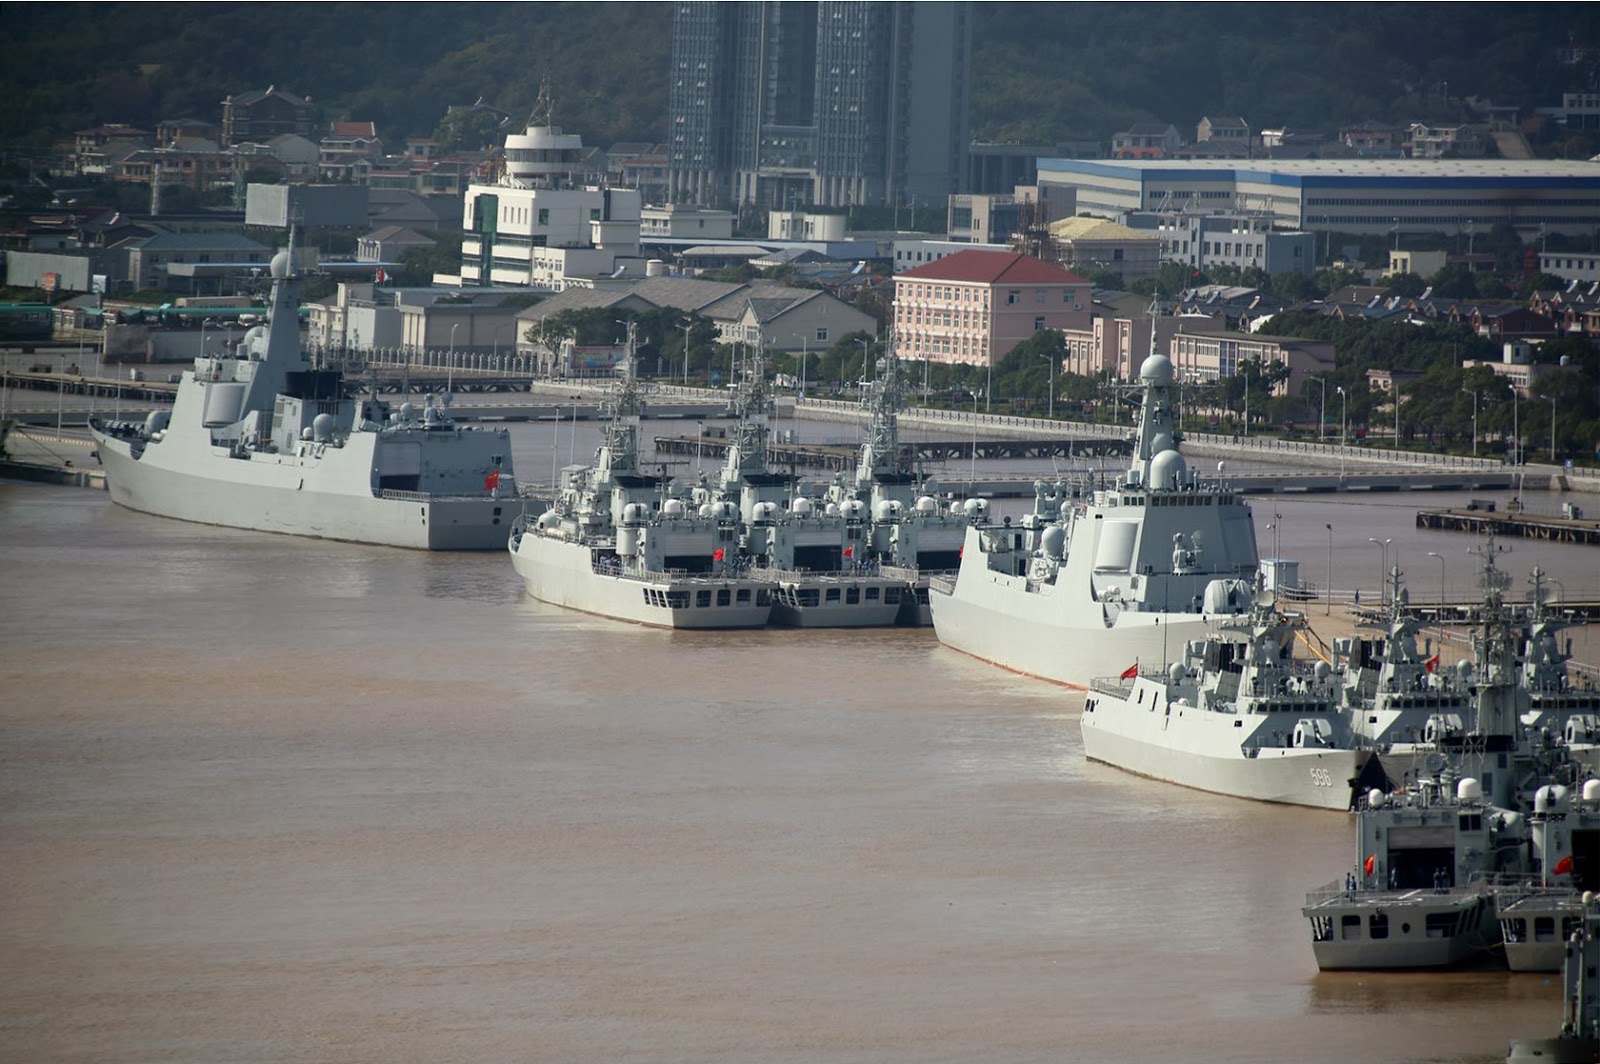 Armée Chinoise / People's Liberation Army (PLA) - Page 9 Warships+At+Chinese+Zhoushan+Naval+Base+type+054+ab+c+d+e+f+type+052+55+56+pla+navy+export+frigate+destroyer+missile+Type+052C+Guided+Missile+Destroyers%252C+Type+054A+Jiangkai+II+Guided+Missile+Frigates+and+Type+056+Guided+Corve